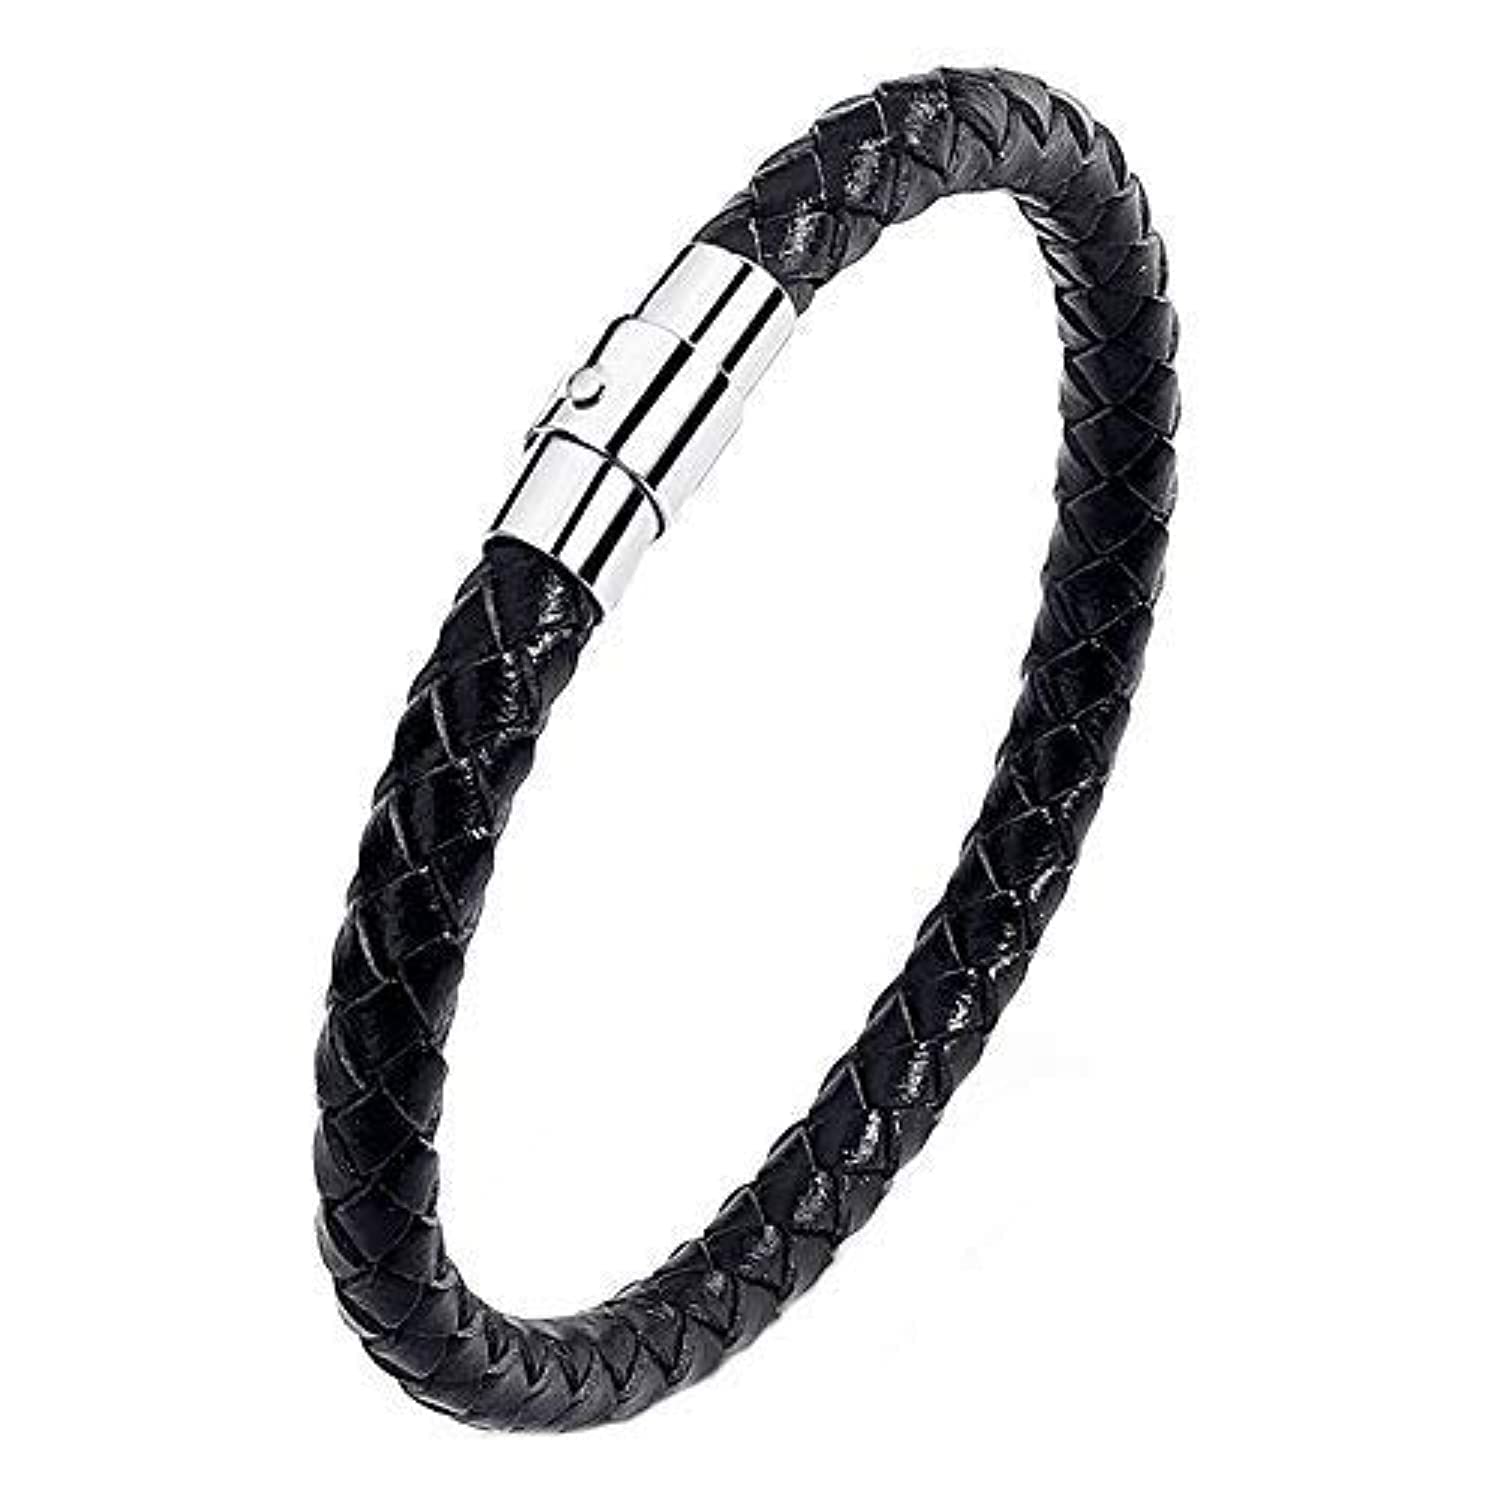 Yellow Chimes Leather Bracelet for Men Handcrafted Braided Black